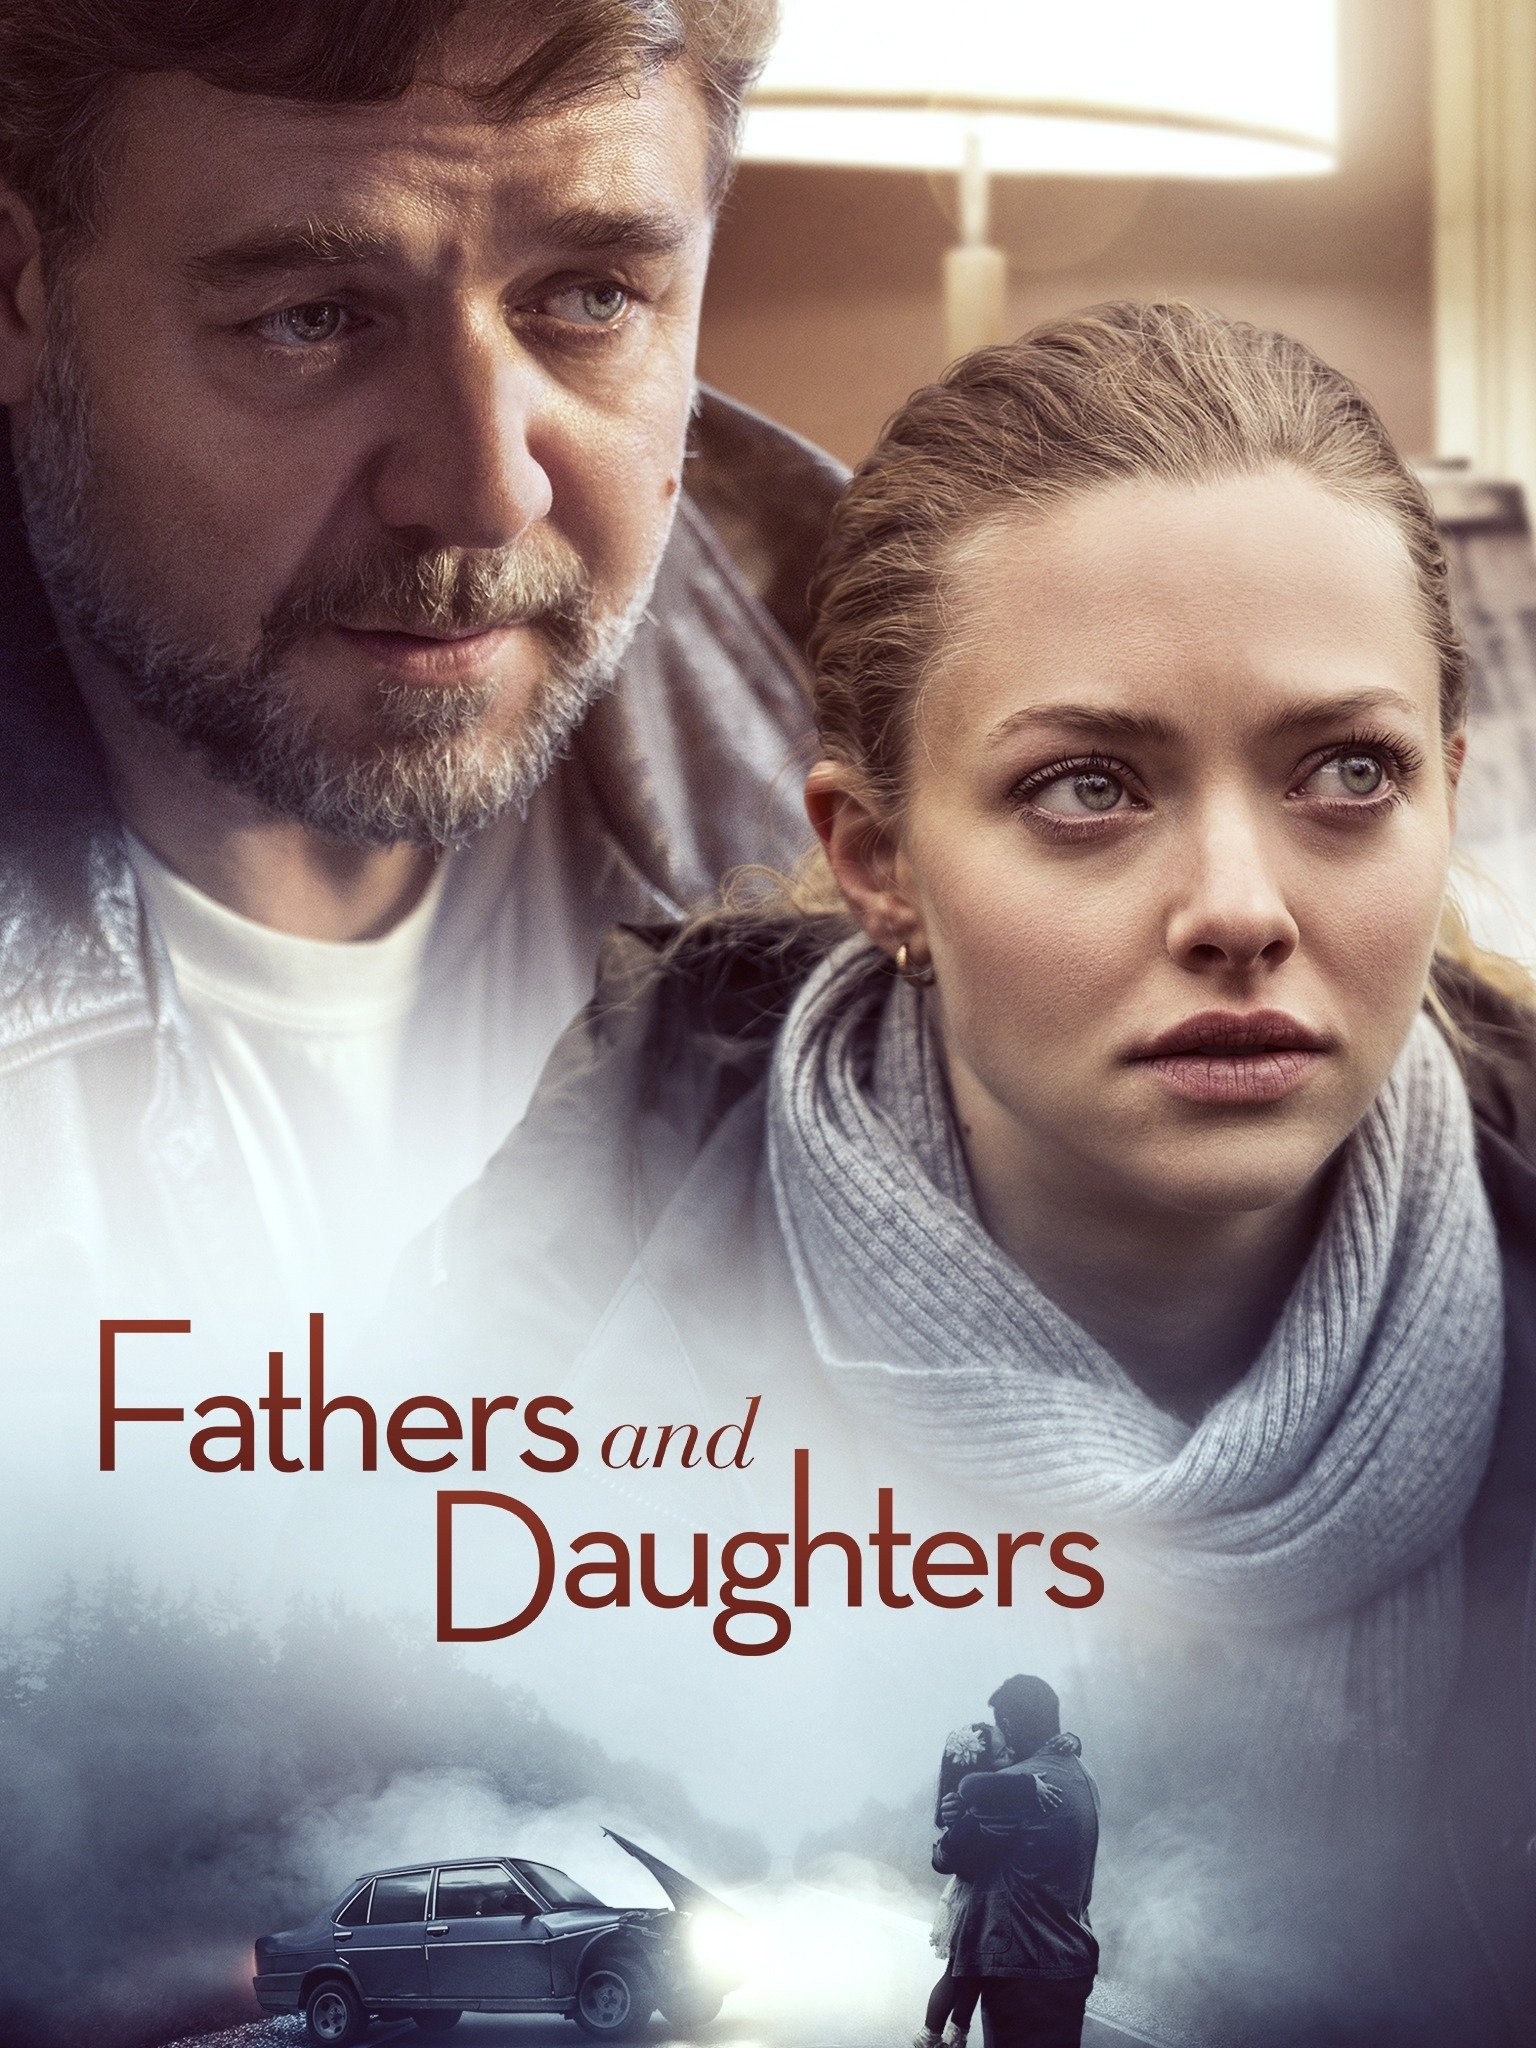 Fathers and Daughters - Rotten Tomatoes